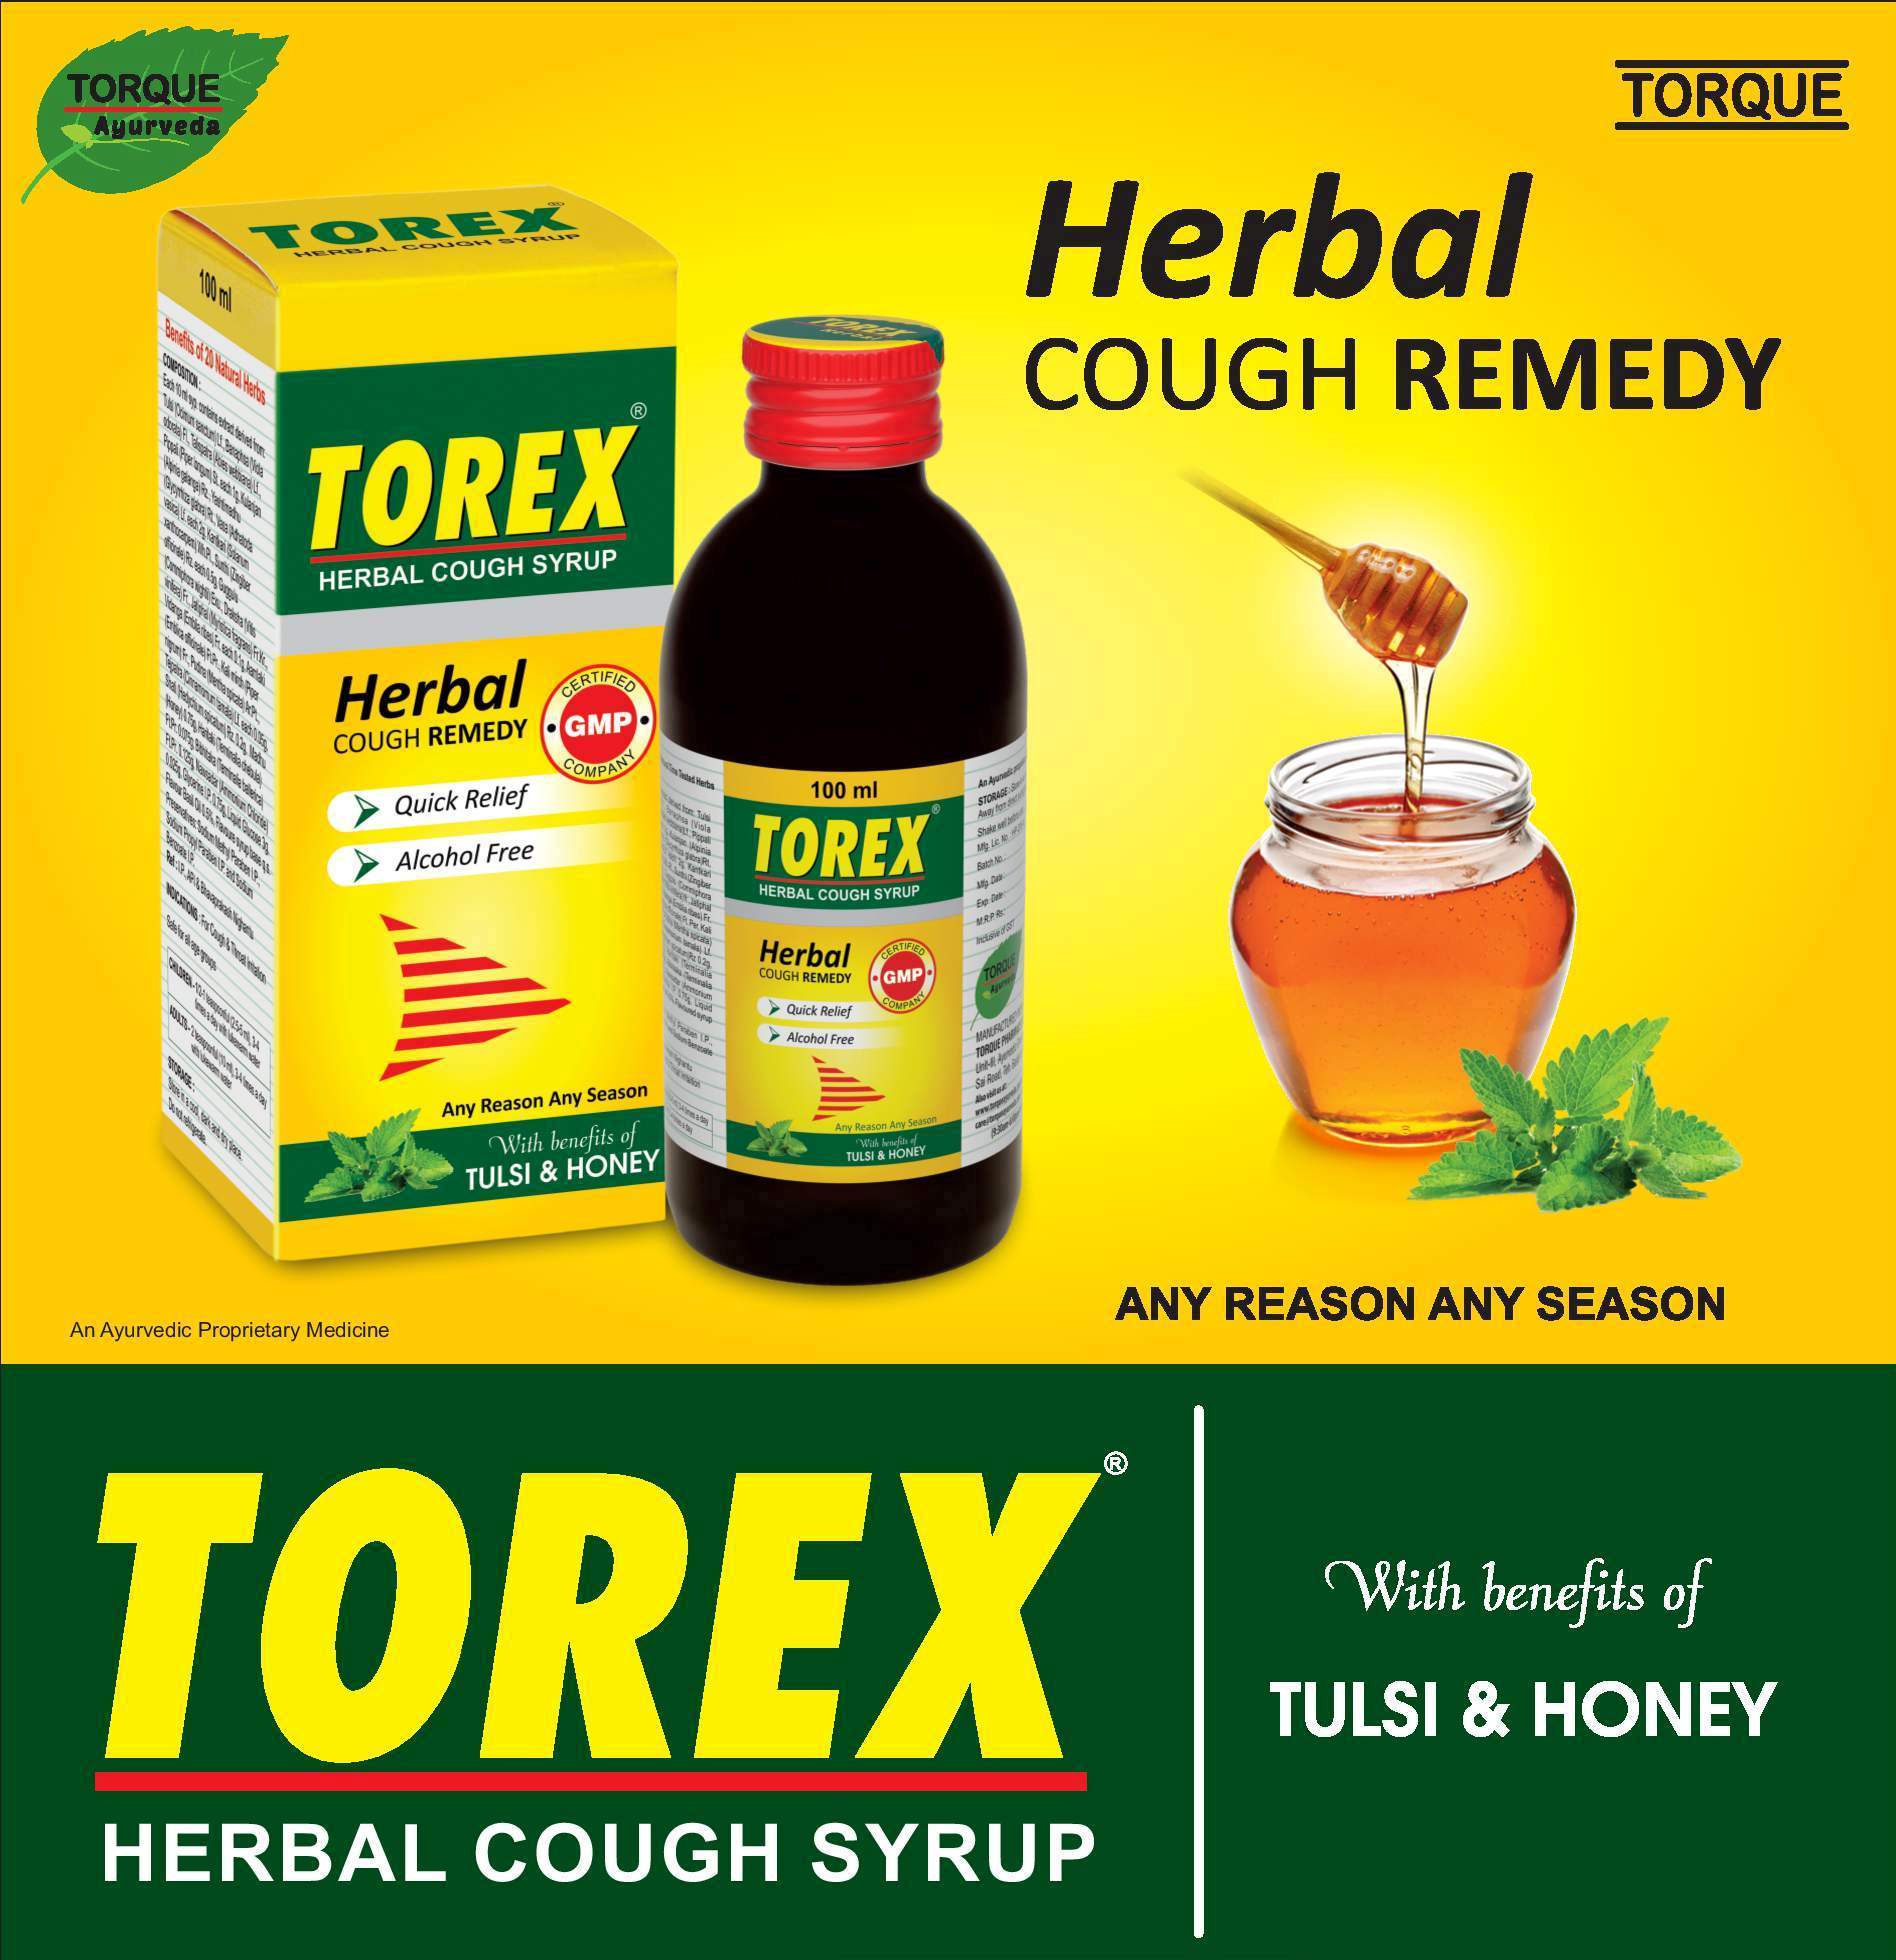 torque-herbal-cough-remedy-ad-times-of-india-delhi-29-08-2019.jpg